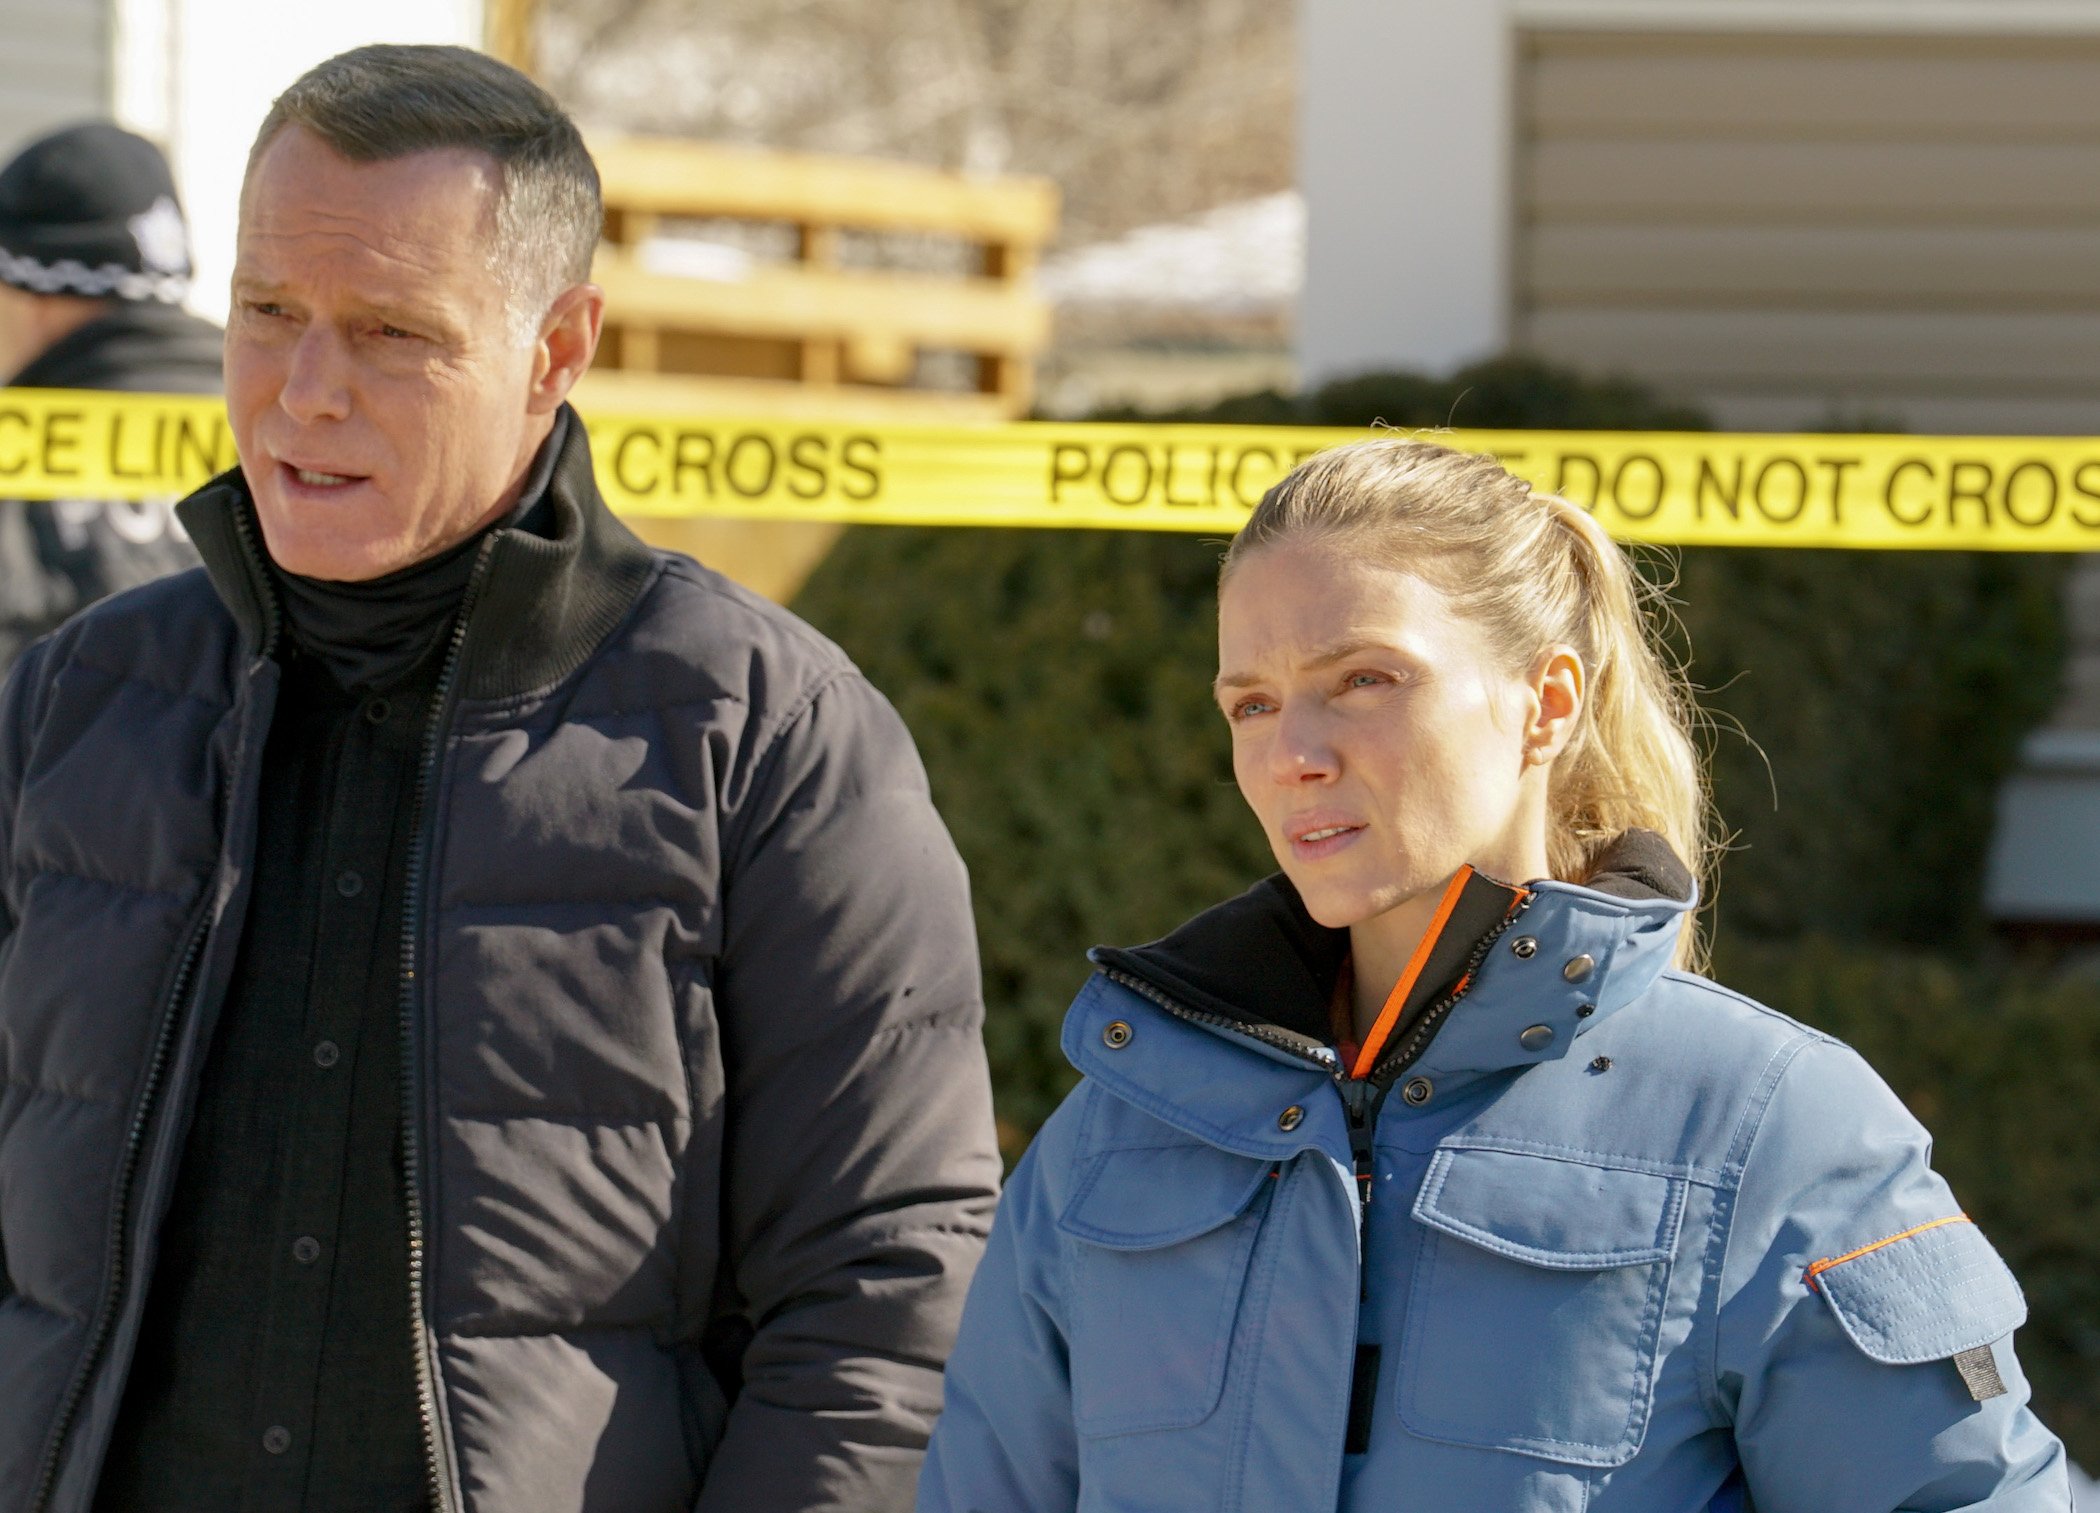 Hank Voight and Hailey Upton from 'Chicago P.D.' Season 9 standing together outside